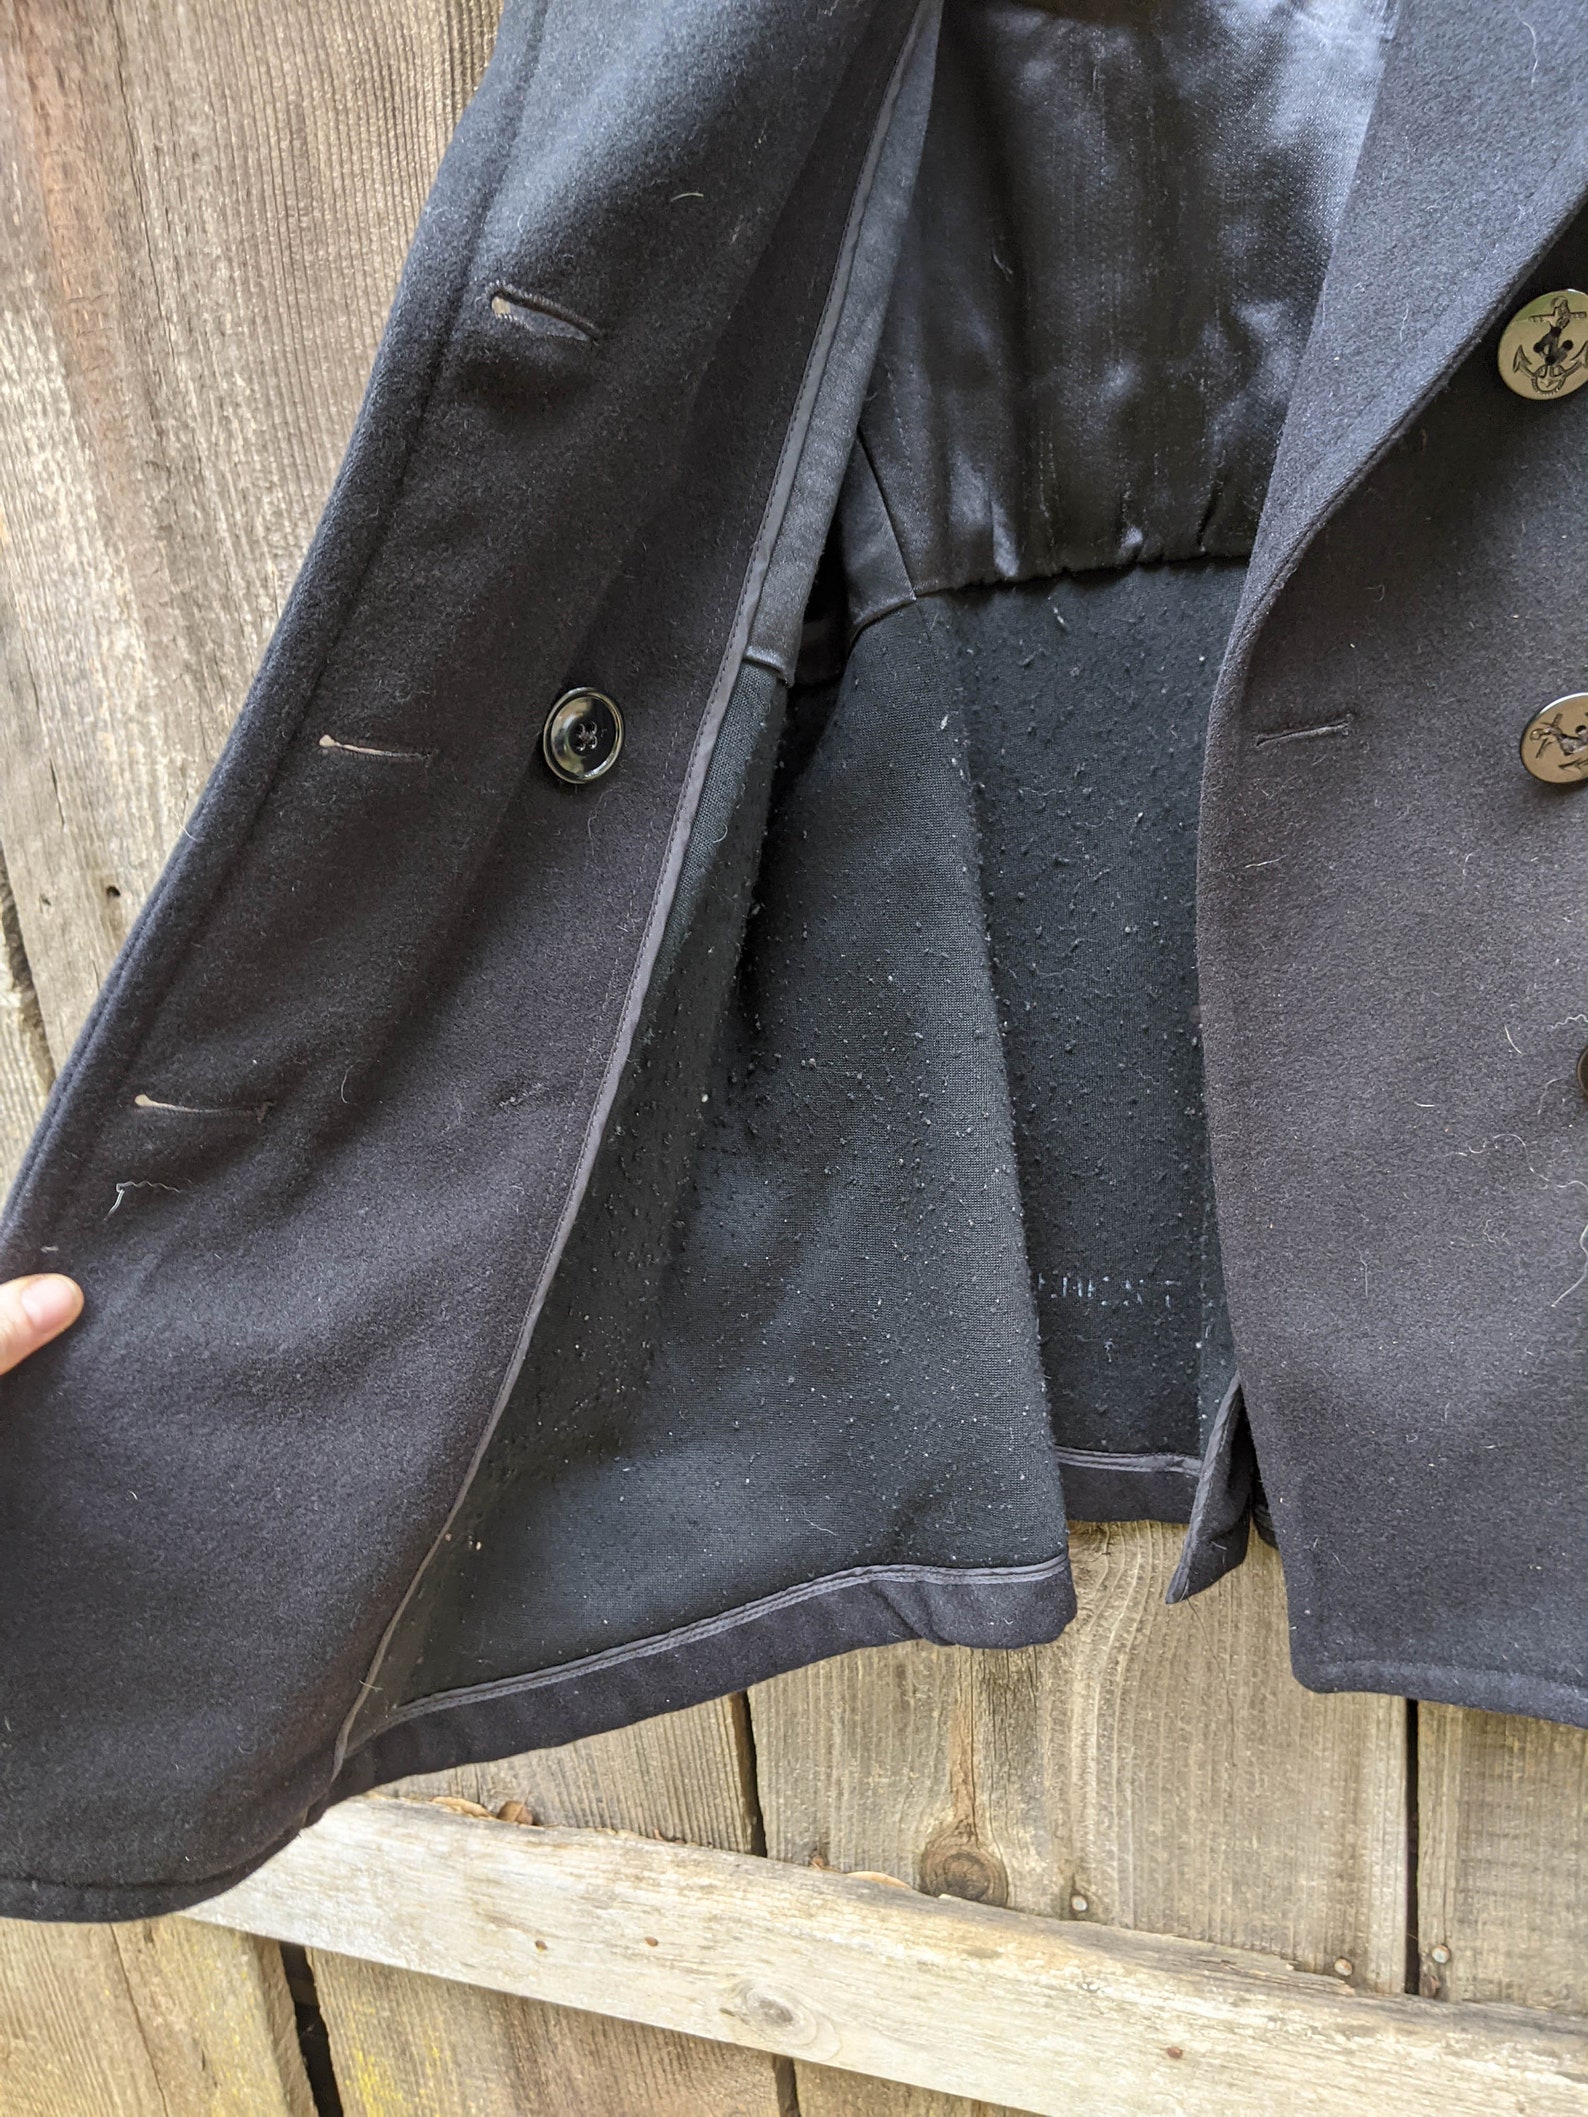 80s Vintage Wool Peacoat Military Issue / US Navy Sailor | Etsy